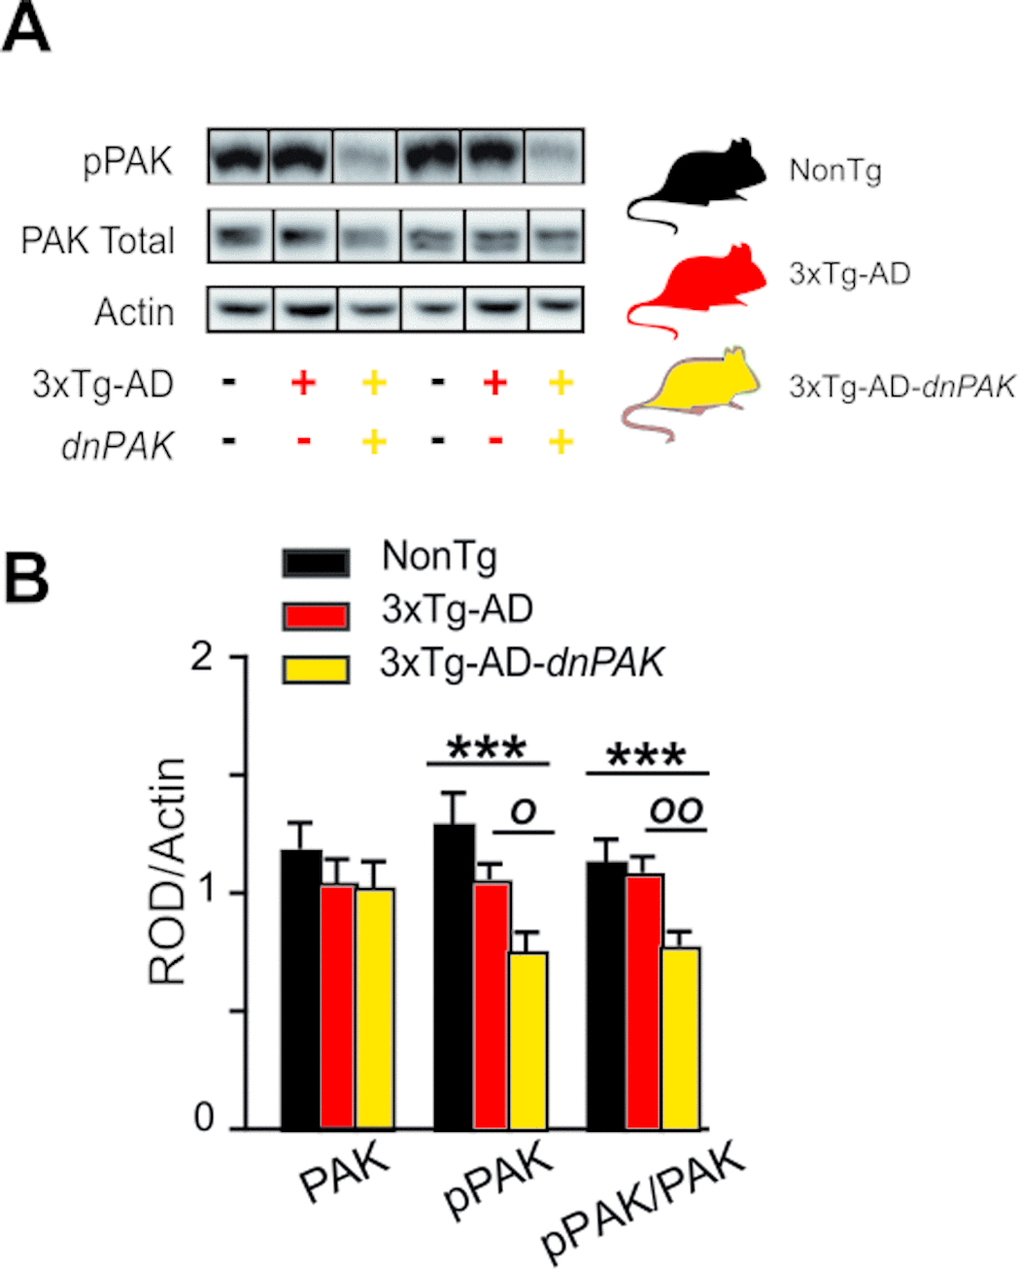 Experimental strategy to generate a mouse model of Alzheimer’s disease with a chronic reduction of PAK activity in the forebrain (A) dnPAK mice were crossed with 3xTg-AD or the corresponding non-transgenic mice (NonTg) yielding three genotypes: NonTg (-/-), 3xTg-AD (+/-) and 3xTg-AD-dnPAK (+/-) (B). Consistently, phosphorylation of PAK was significantly reduced in the frontal cortex of 18-month-old 3xTg-AD-dnPAK animals, confirming the inactivation of PAK. Actin served as an internal control for protein loading (N=12-13 mice for NonTg, N=19-21 mice for 3xTg-AD and N=16-17 mice for 3xTg-AD-dnPAK). Examples of Western blots were taken from the same immunoblot experiment for each primary antibody, on the same gel but run in a random order, and rearranged in the same order as the graphs (separated by black lines). O pOO pone way ANOVA. Abbreviations: PAK: p21 activated kinase, dnPAK: dominant negative p21-activated kinase, pPAK: phospho-PAK; ROD, relative optical density.